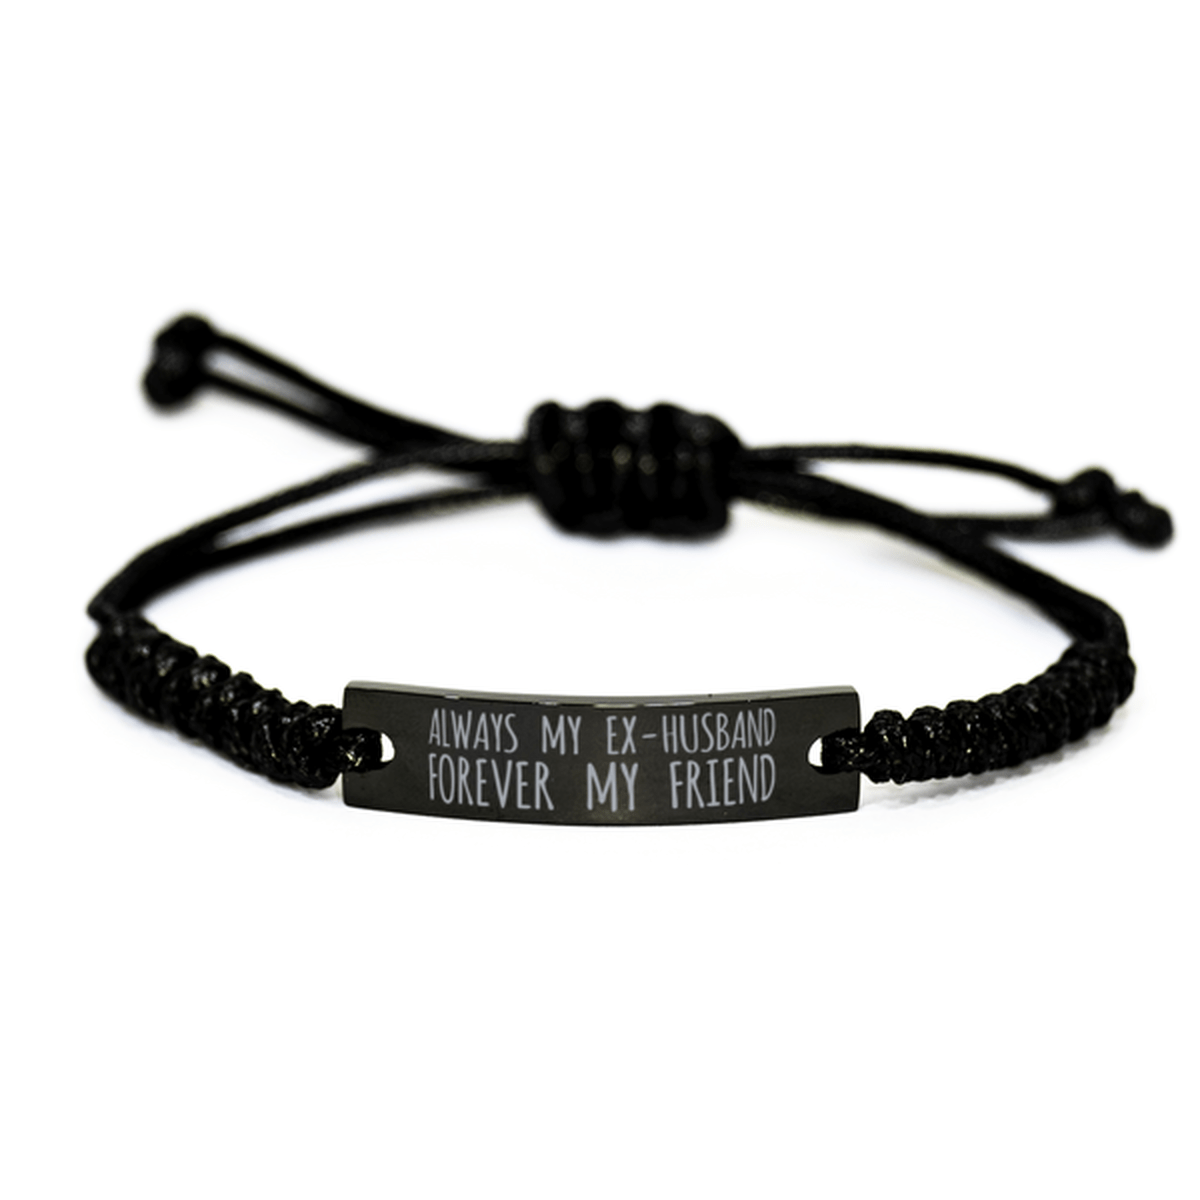 Inspirational Ex-Husband Black Rope Bracelet, Always My Ex-Husband Forever My Friend, Best Birthday Gifts For Family